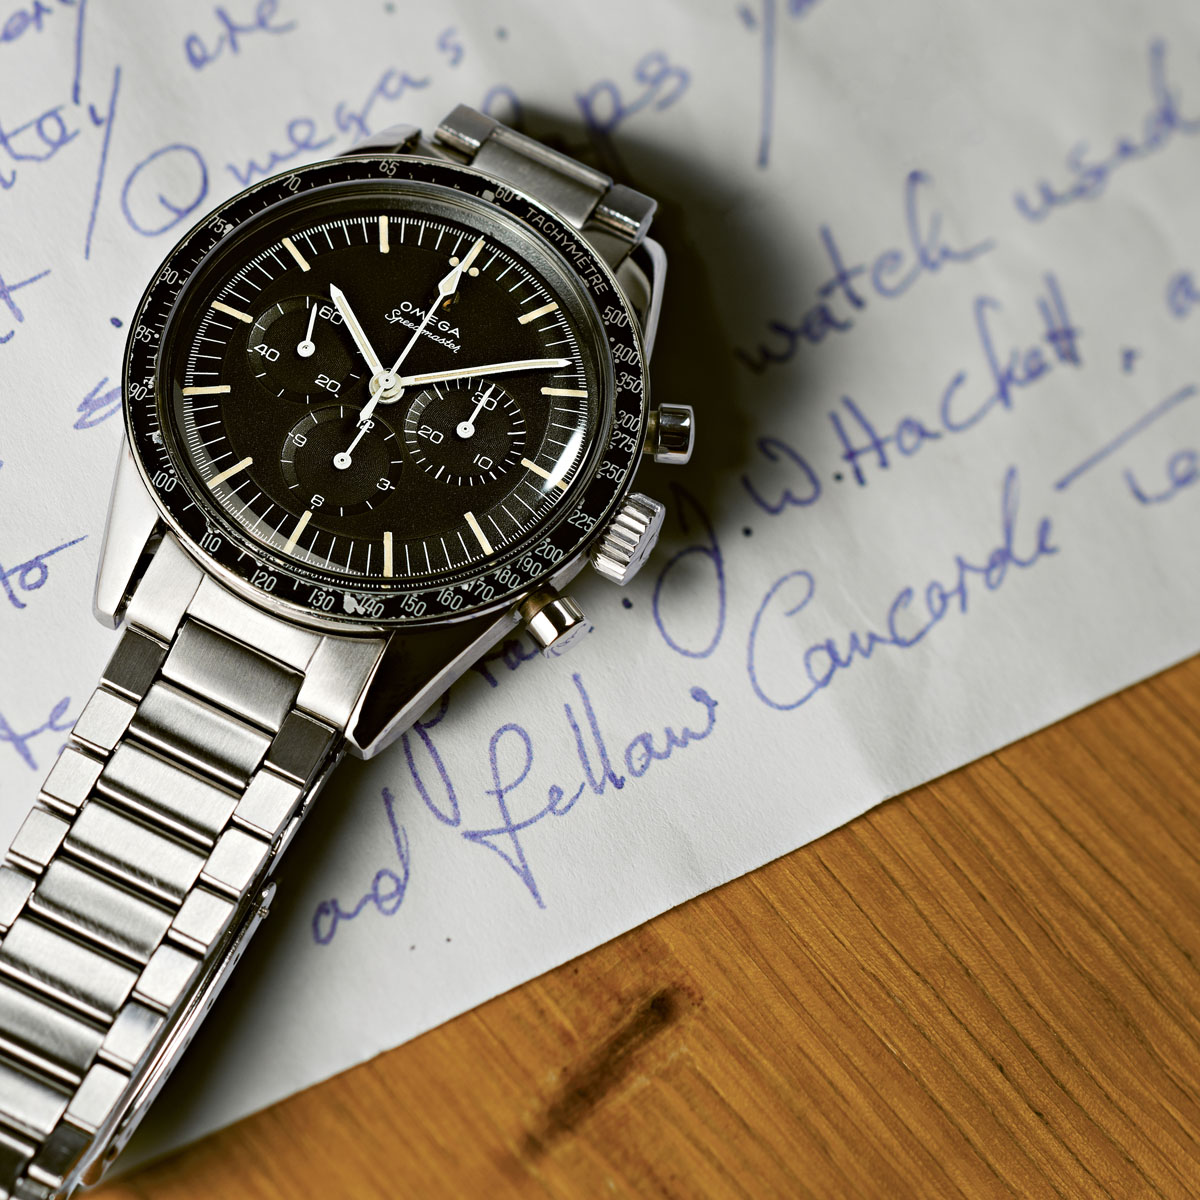 John Hackett’s watch can be seen at the OMEGA Museum